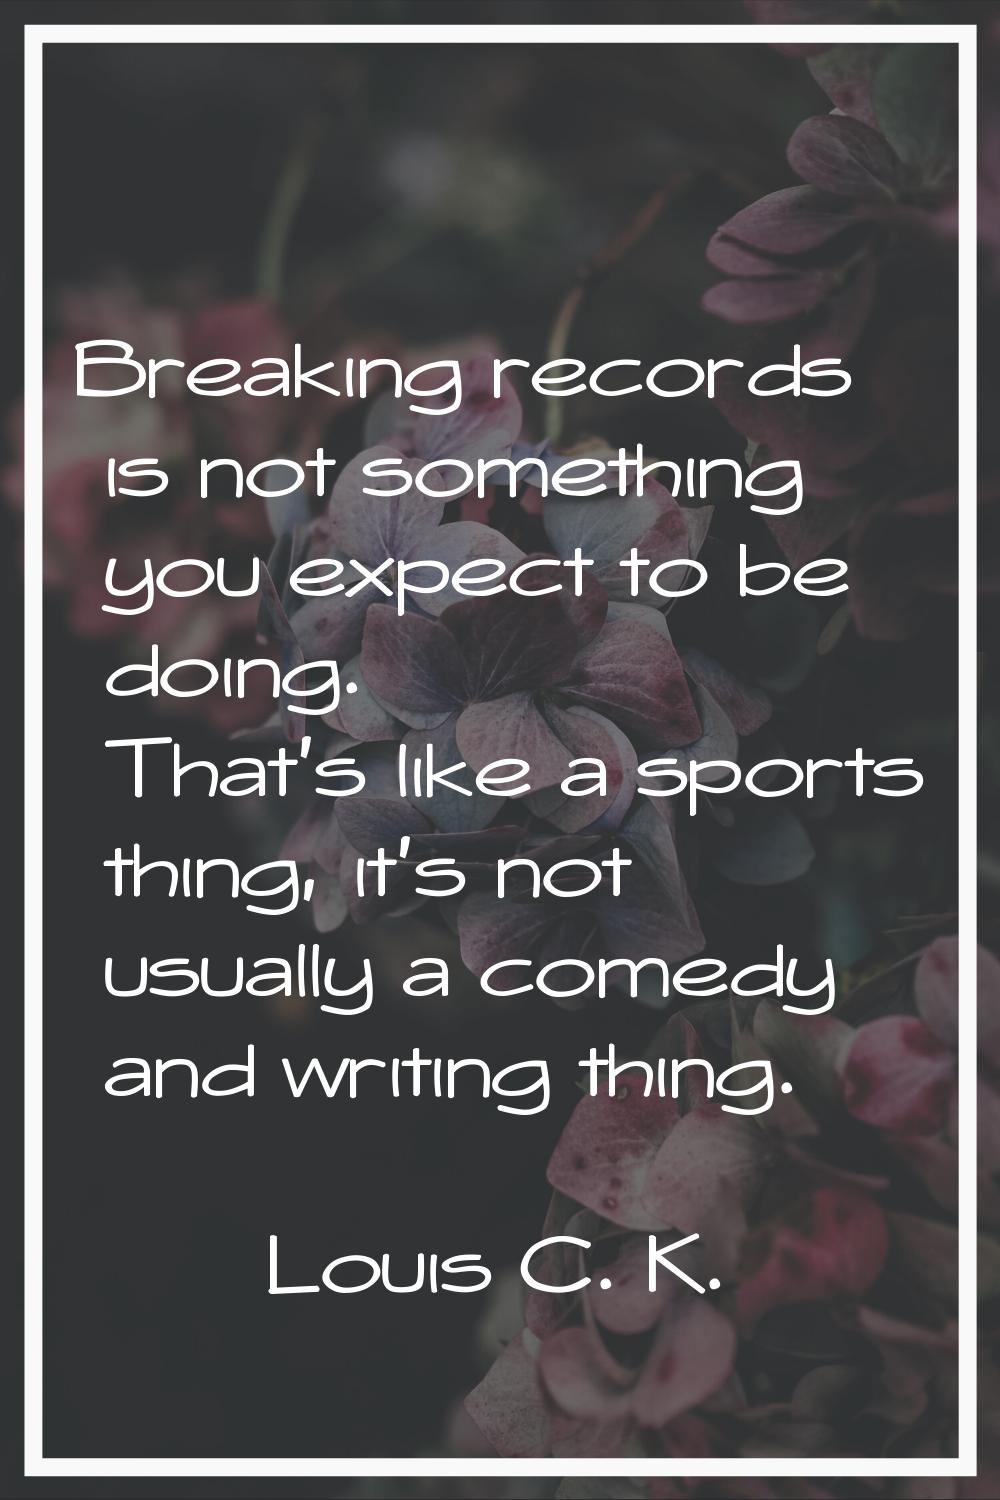 Breaking records is not something you expect to be doing. That's like a sports thing, it's not usua